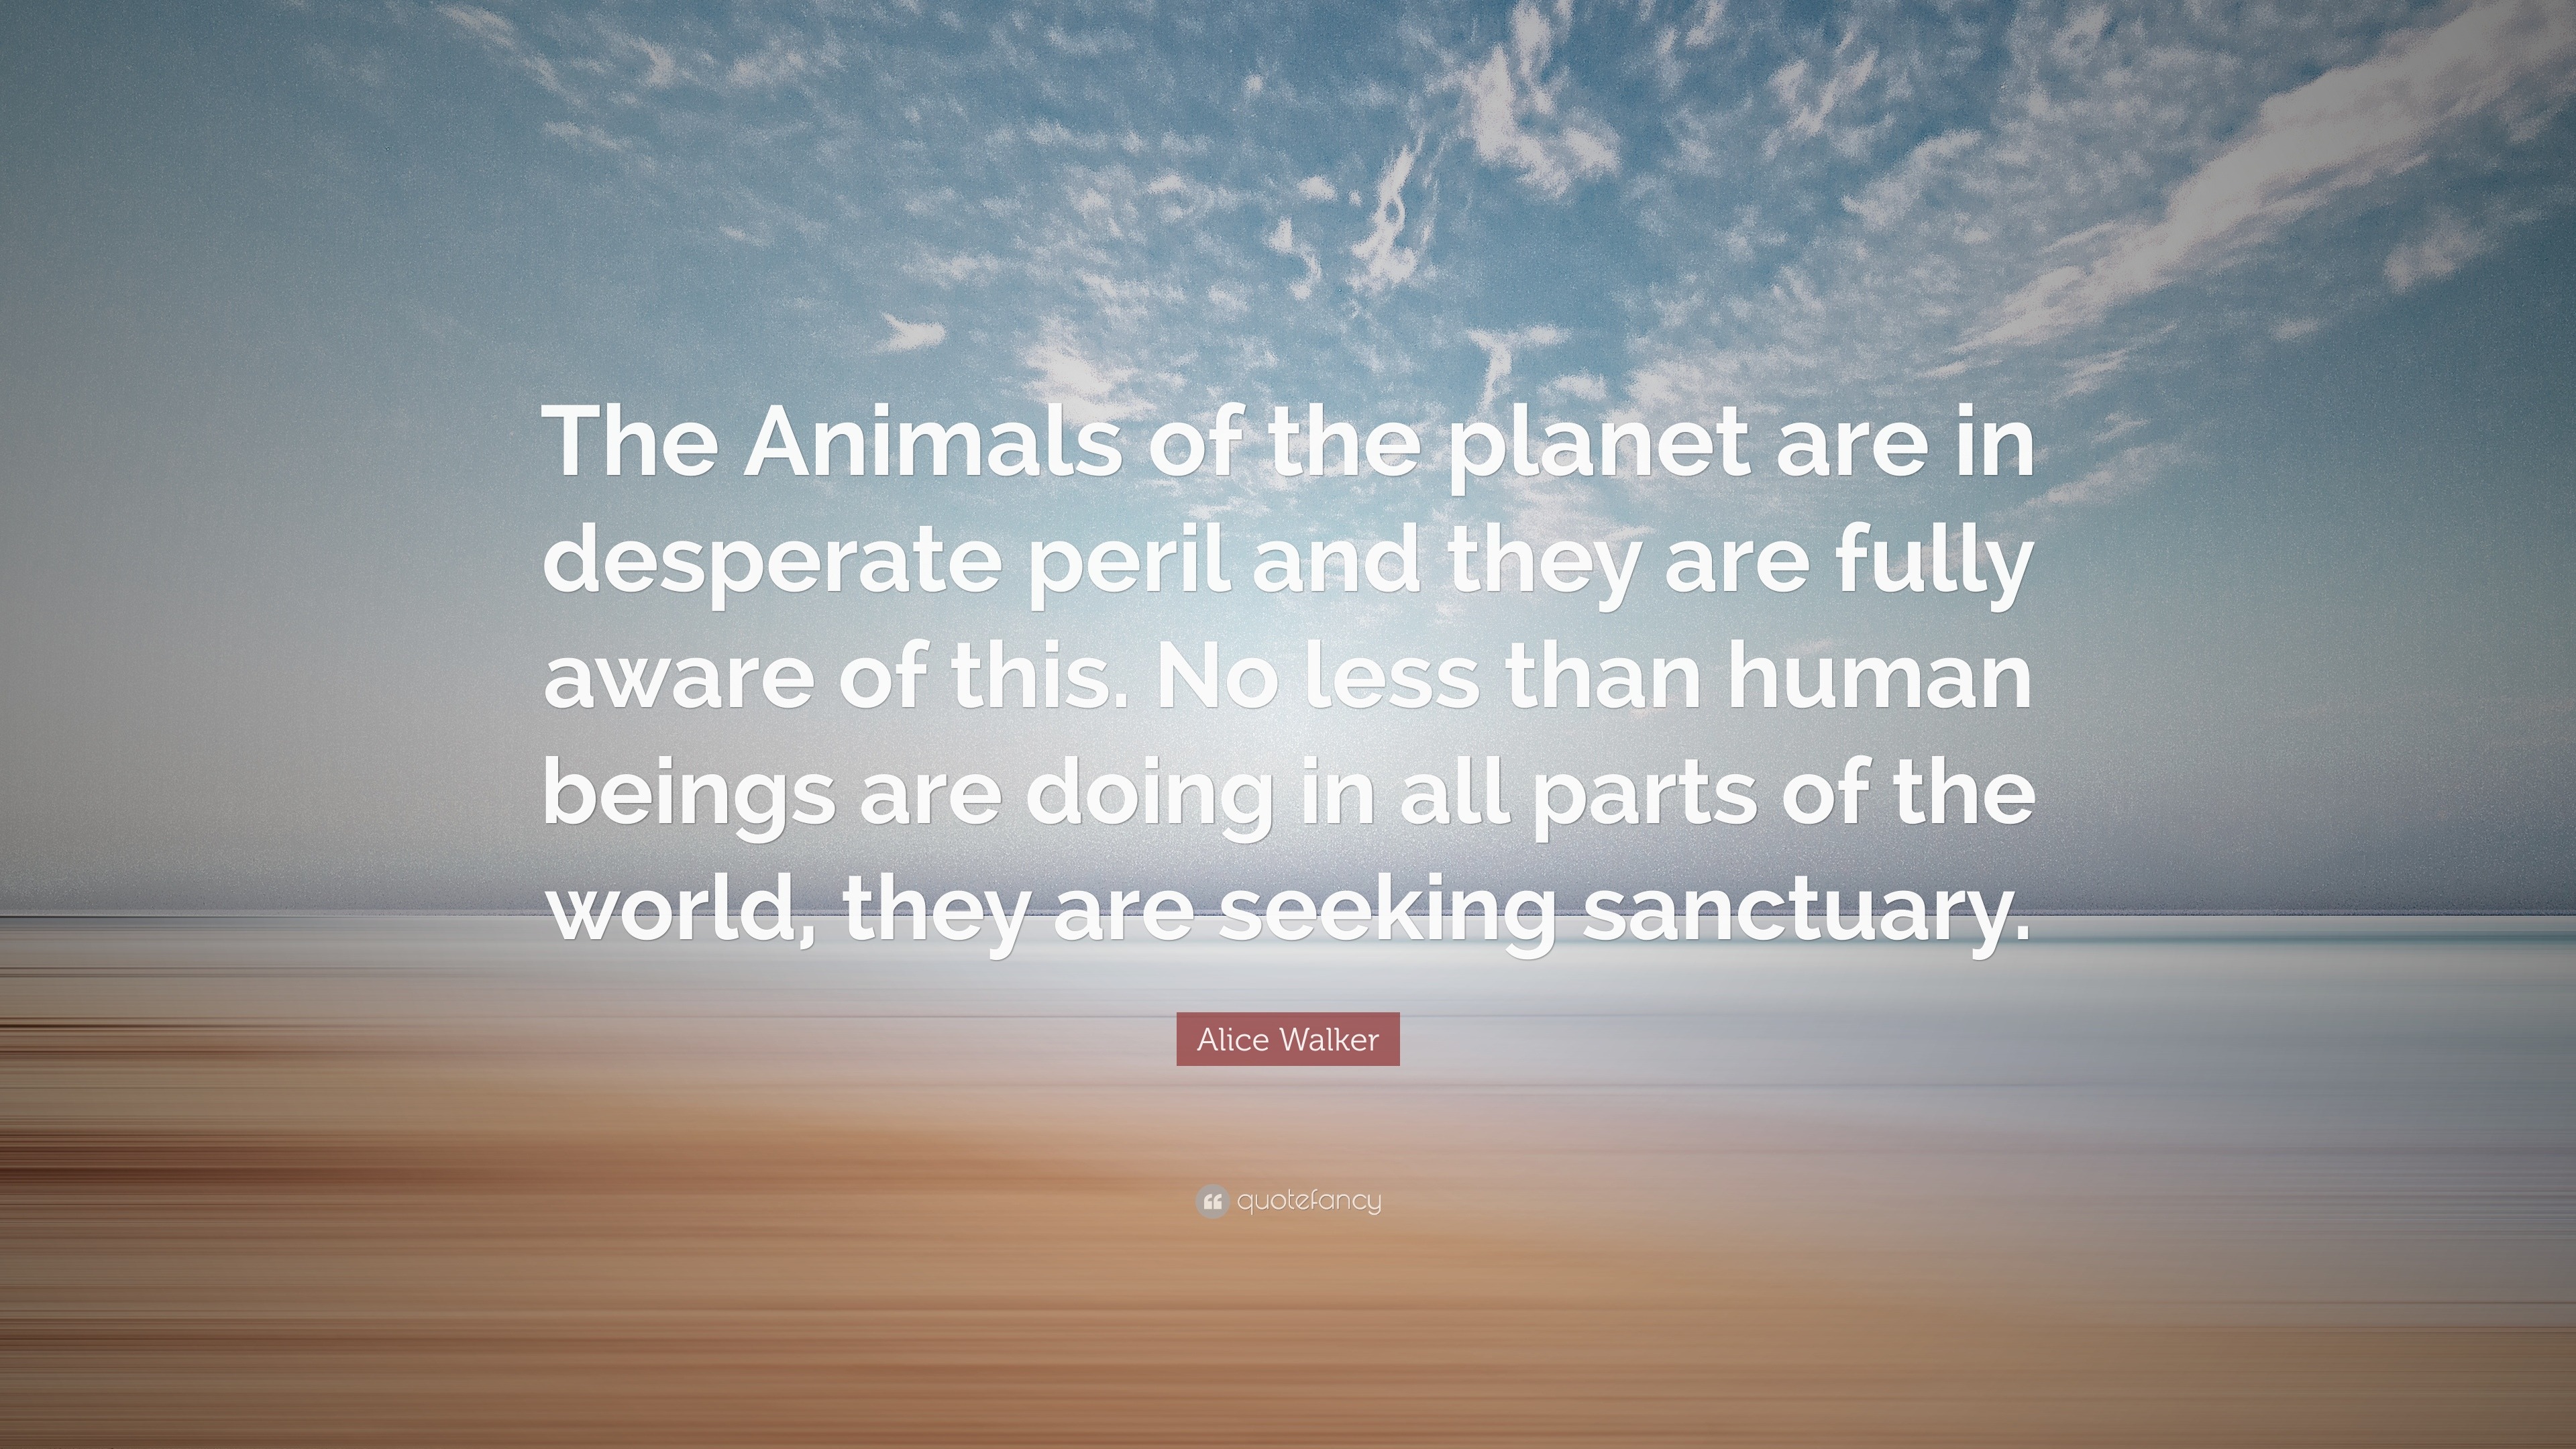 1969828 Alice Walker Quote The Animals of the planet are in desperate